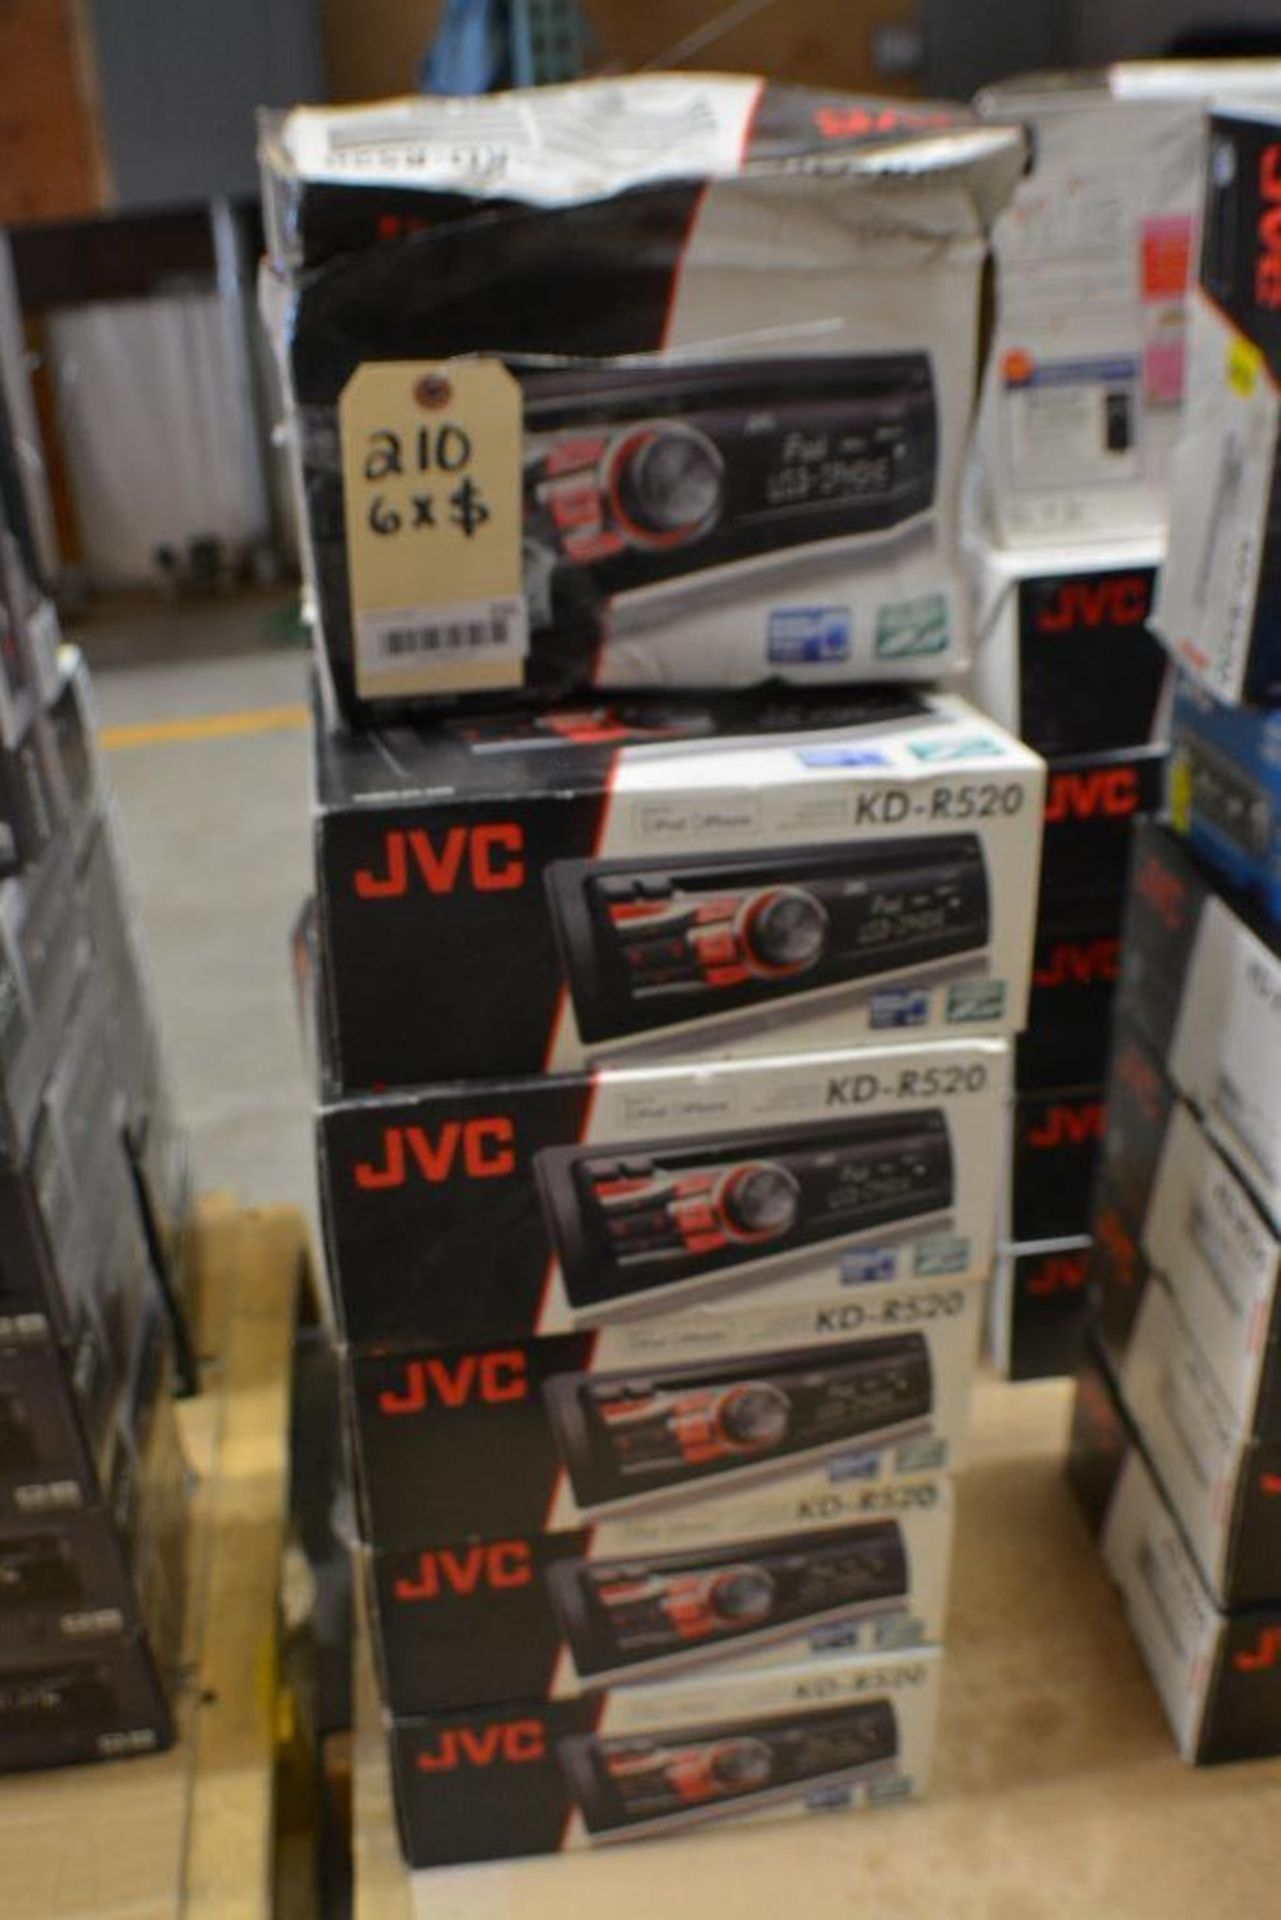 JVC Car Stereo KDR520 USB-CD Receiver with Dual AUX/ Ready for Bluetooth Adapter. (Some Stereos not